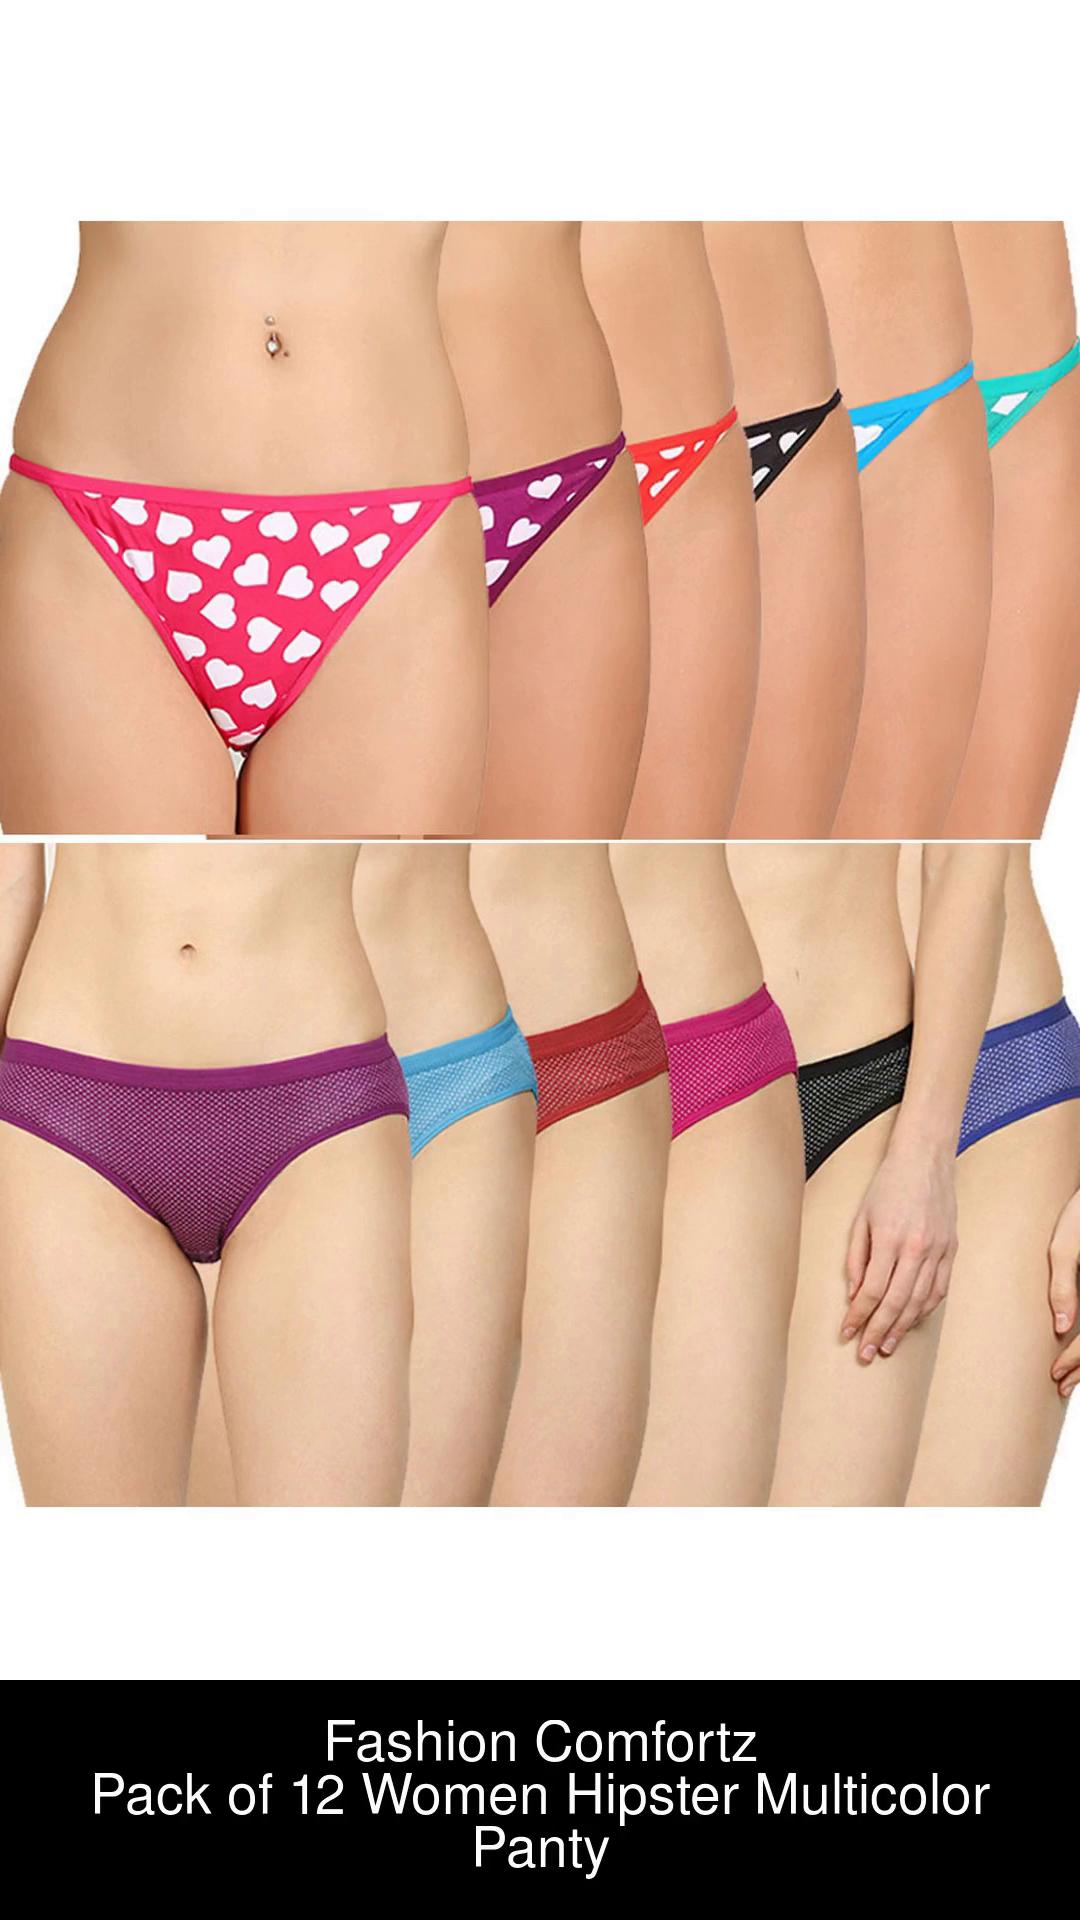 Fashion Comfortz Undergarments,Innerwear Combo for Girls,Ladies Women  Hipster Multicolor Panty - Buy Multicolor Fashion Comfortz Undergarments,Innerwear  Combo for Girls,Ladies Women Hipster Multicolor Panty Online at Best Prices  in India